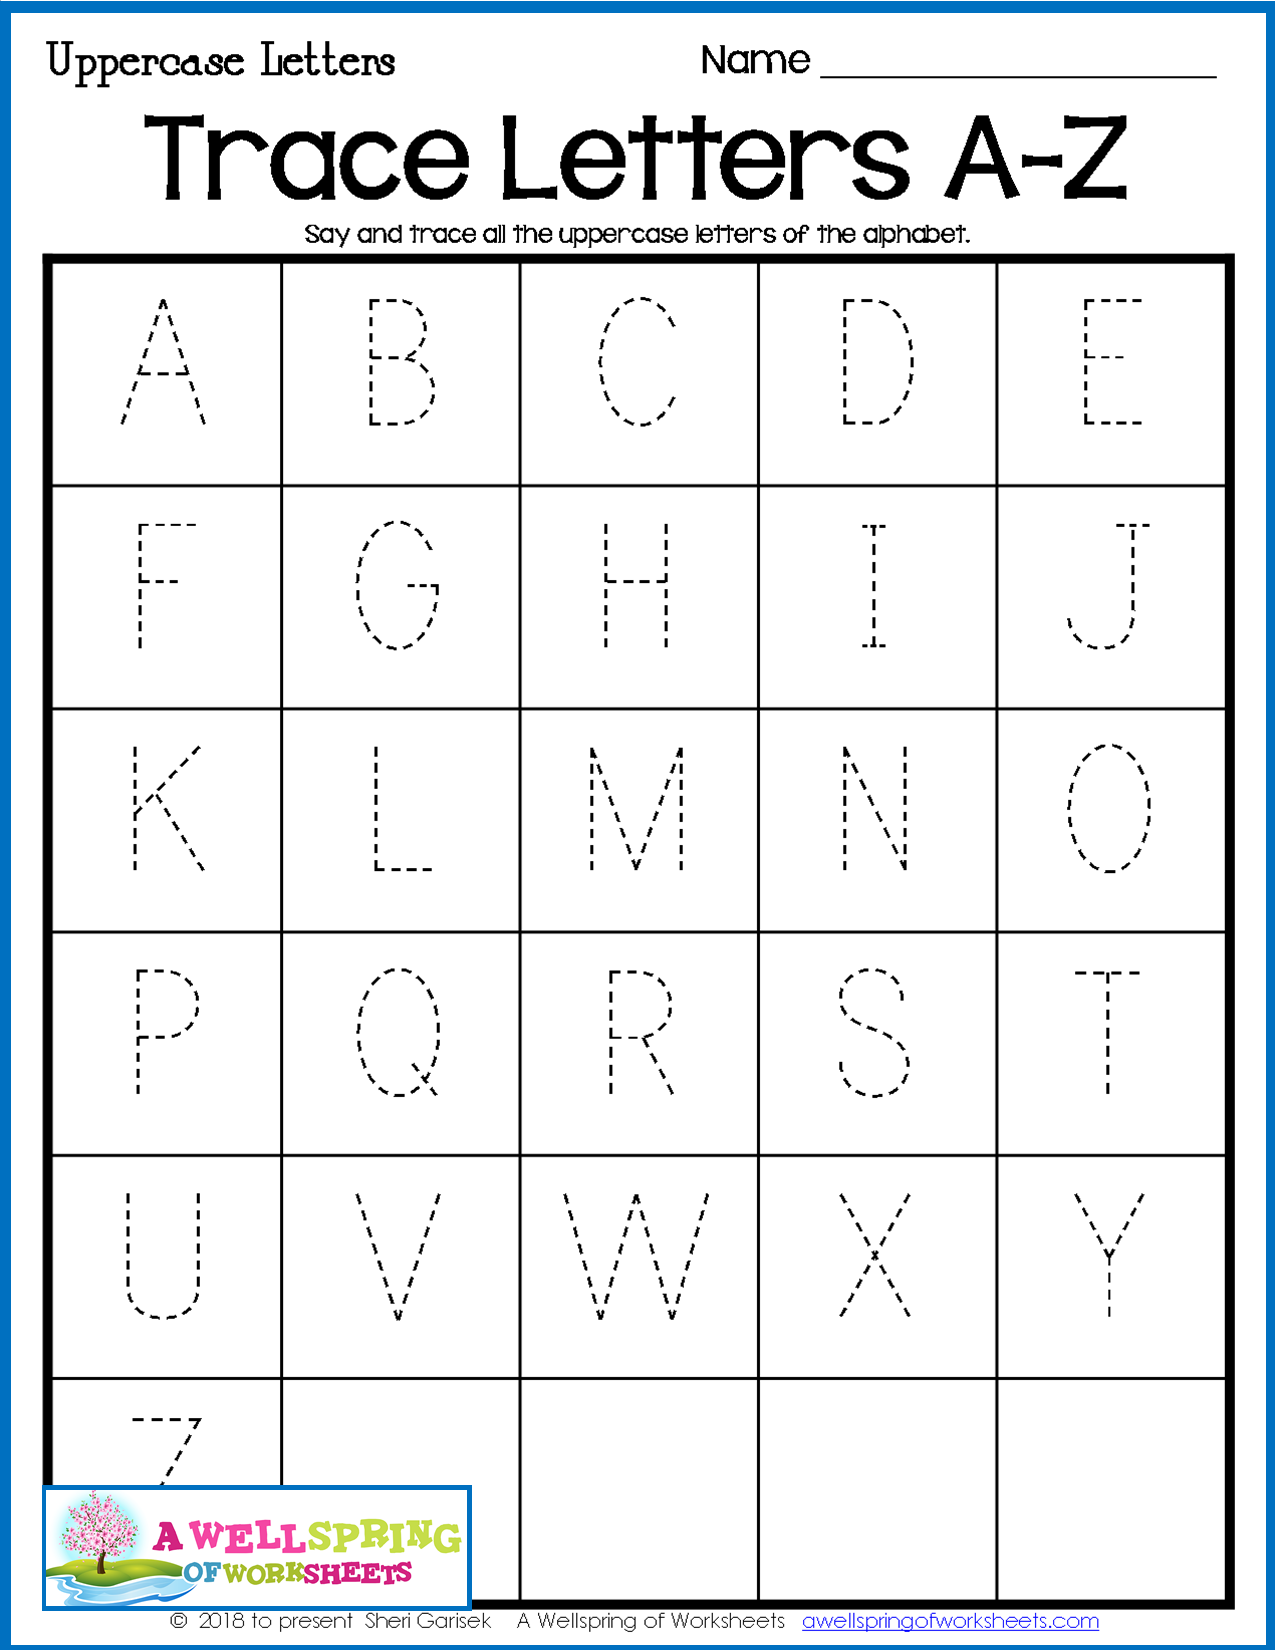 upper-case-letters-printable-printable-word-searches